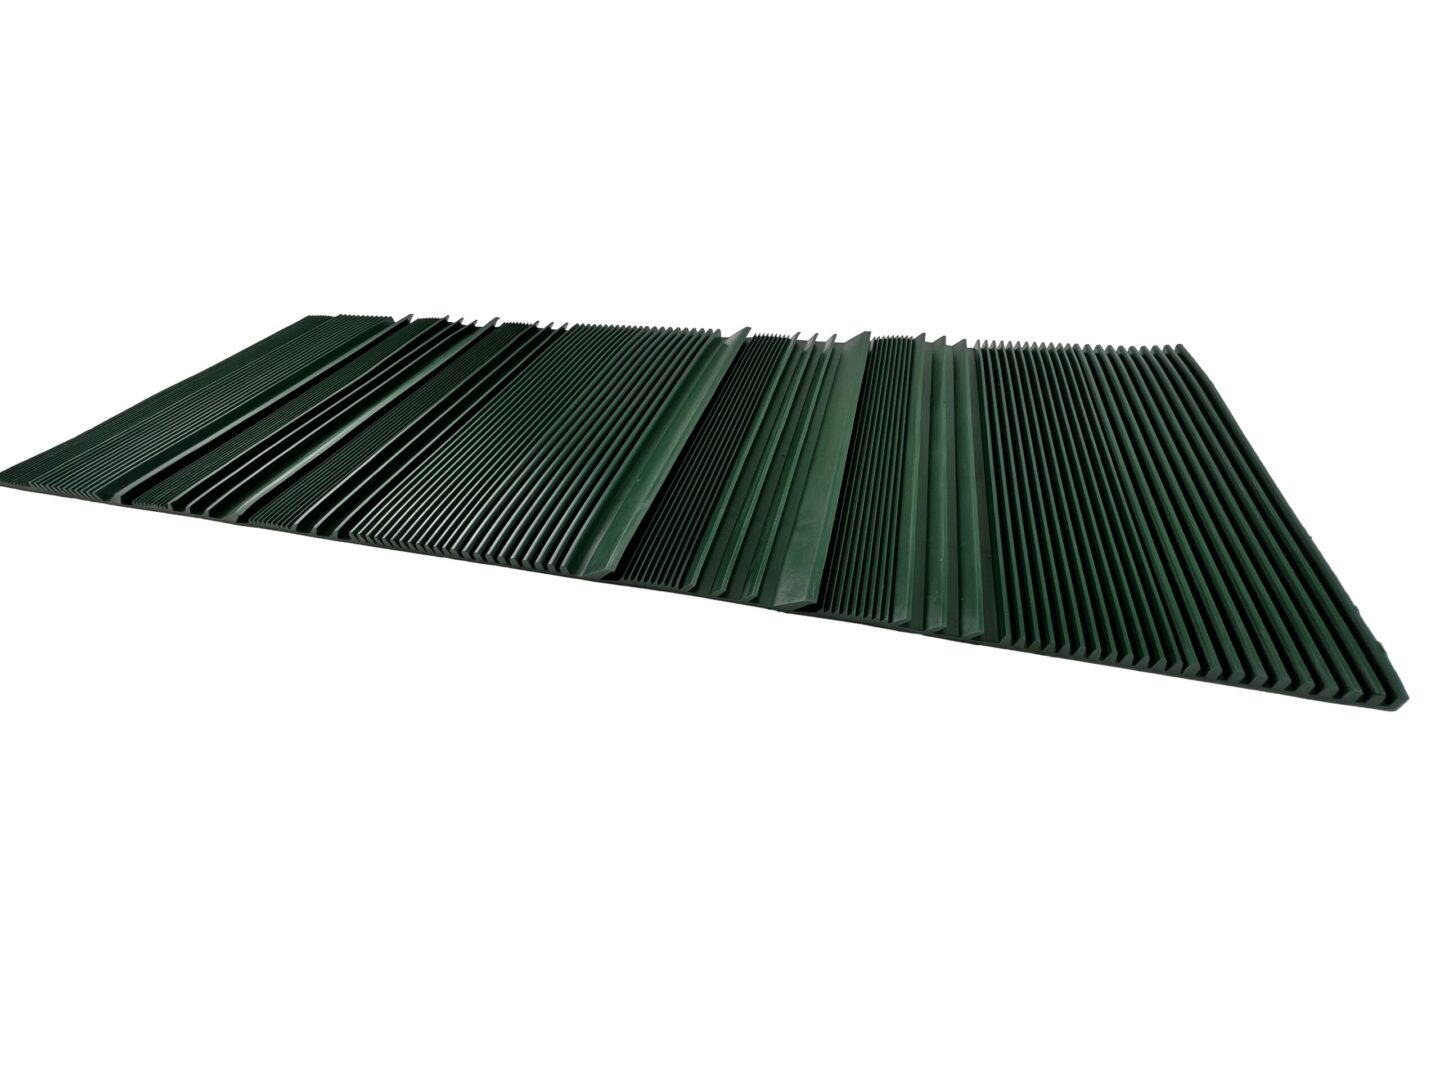 A Rubber Matting Hungarian for Sluice Box 27-inch x 10-inch Trimmable on a white background.